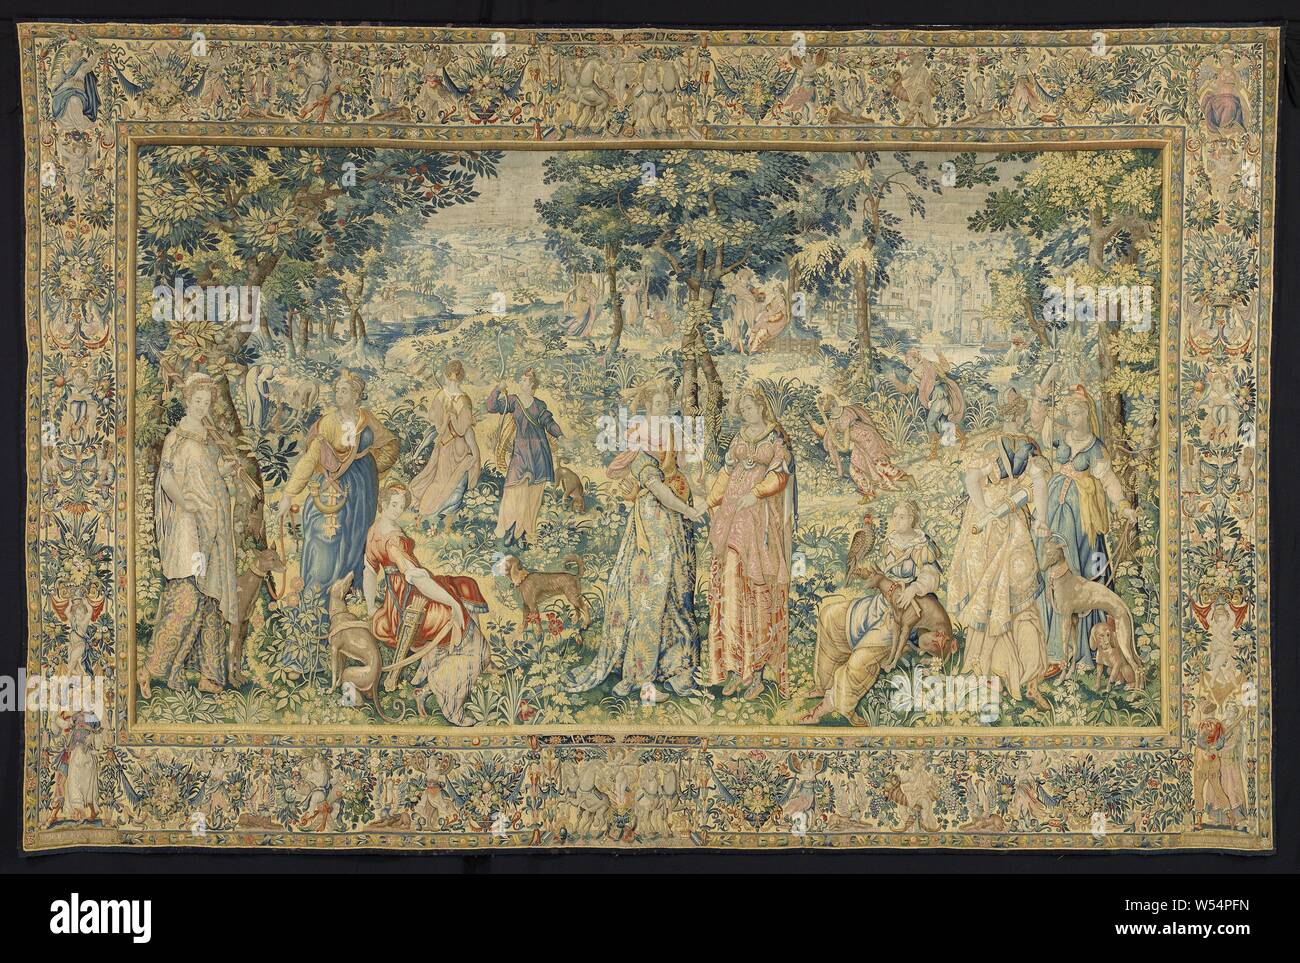 Cephalus and Procris Cephalus and Procris Tapestry with the history of Cephalus and Procris from the Diana series The histories of Diana (series title), Central are Diana, dressed in blue brocade from Lucca with white birds and lions as patrons, and Procis saying goodbye to each other before the latter returns to her husband Cephalus, who had accused her of infidelity and for which she had fled. The moments of seduction and flights are presented at the end in nature and on the second plan. The foreground is dominated on the left and right by elegantly dressed hunters with their hunting gear Stock Photo